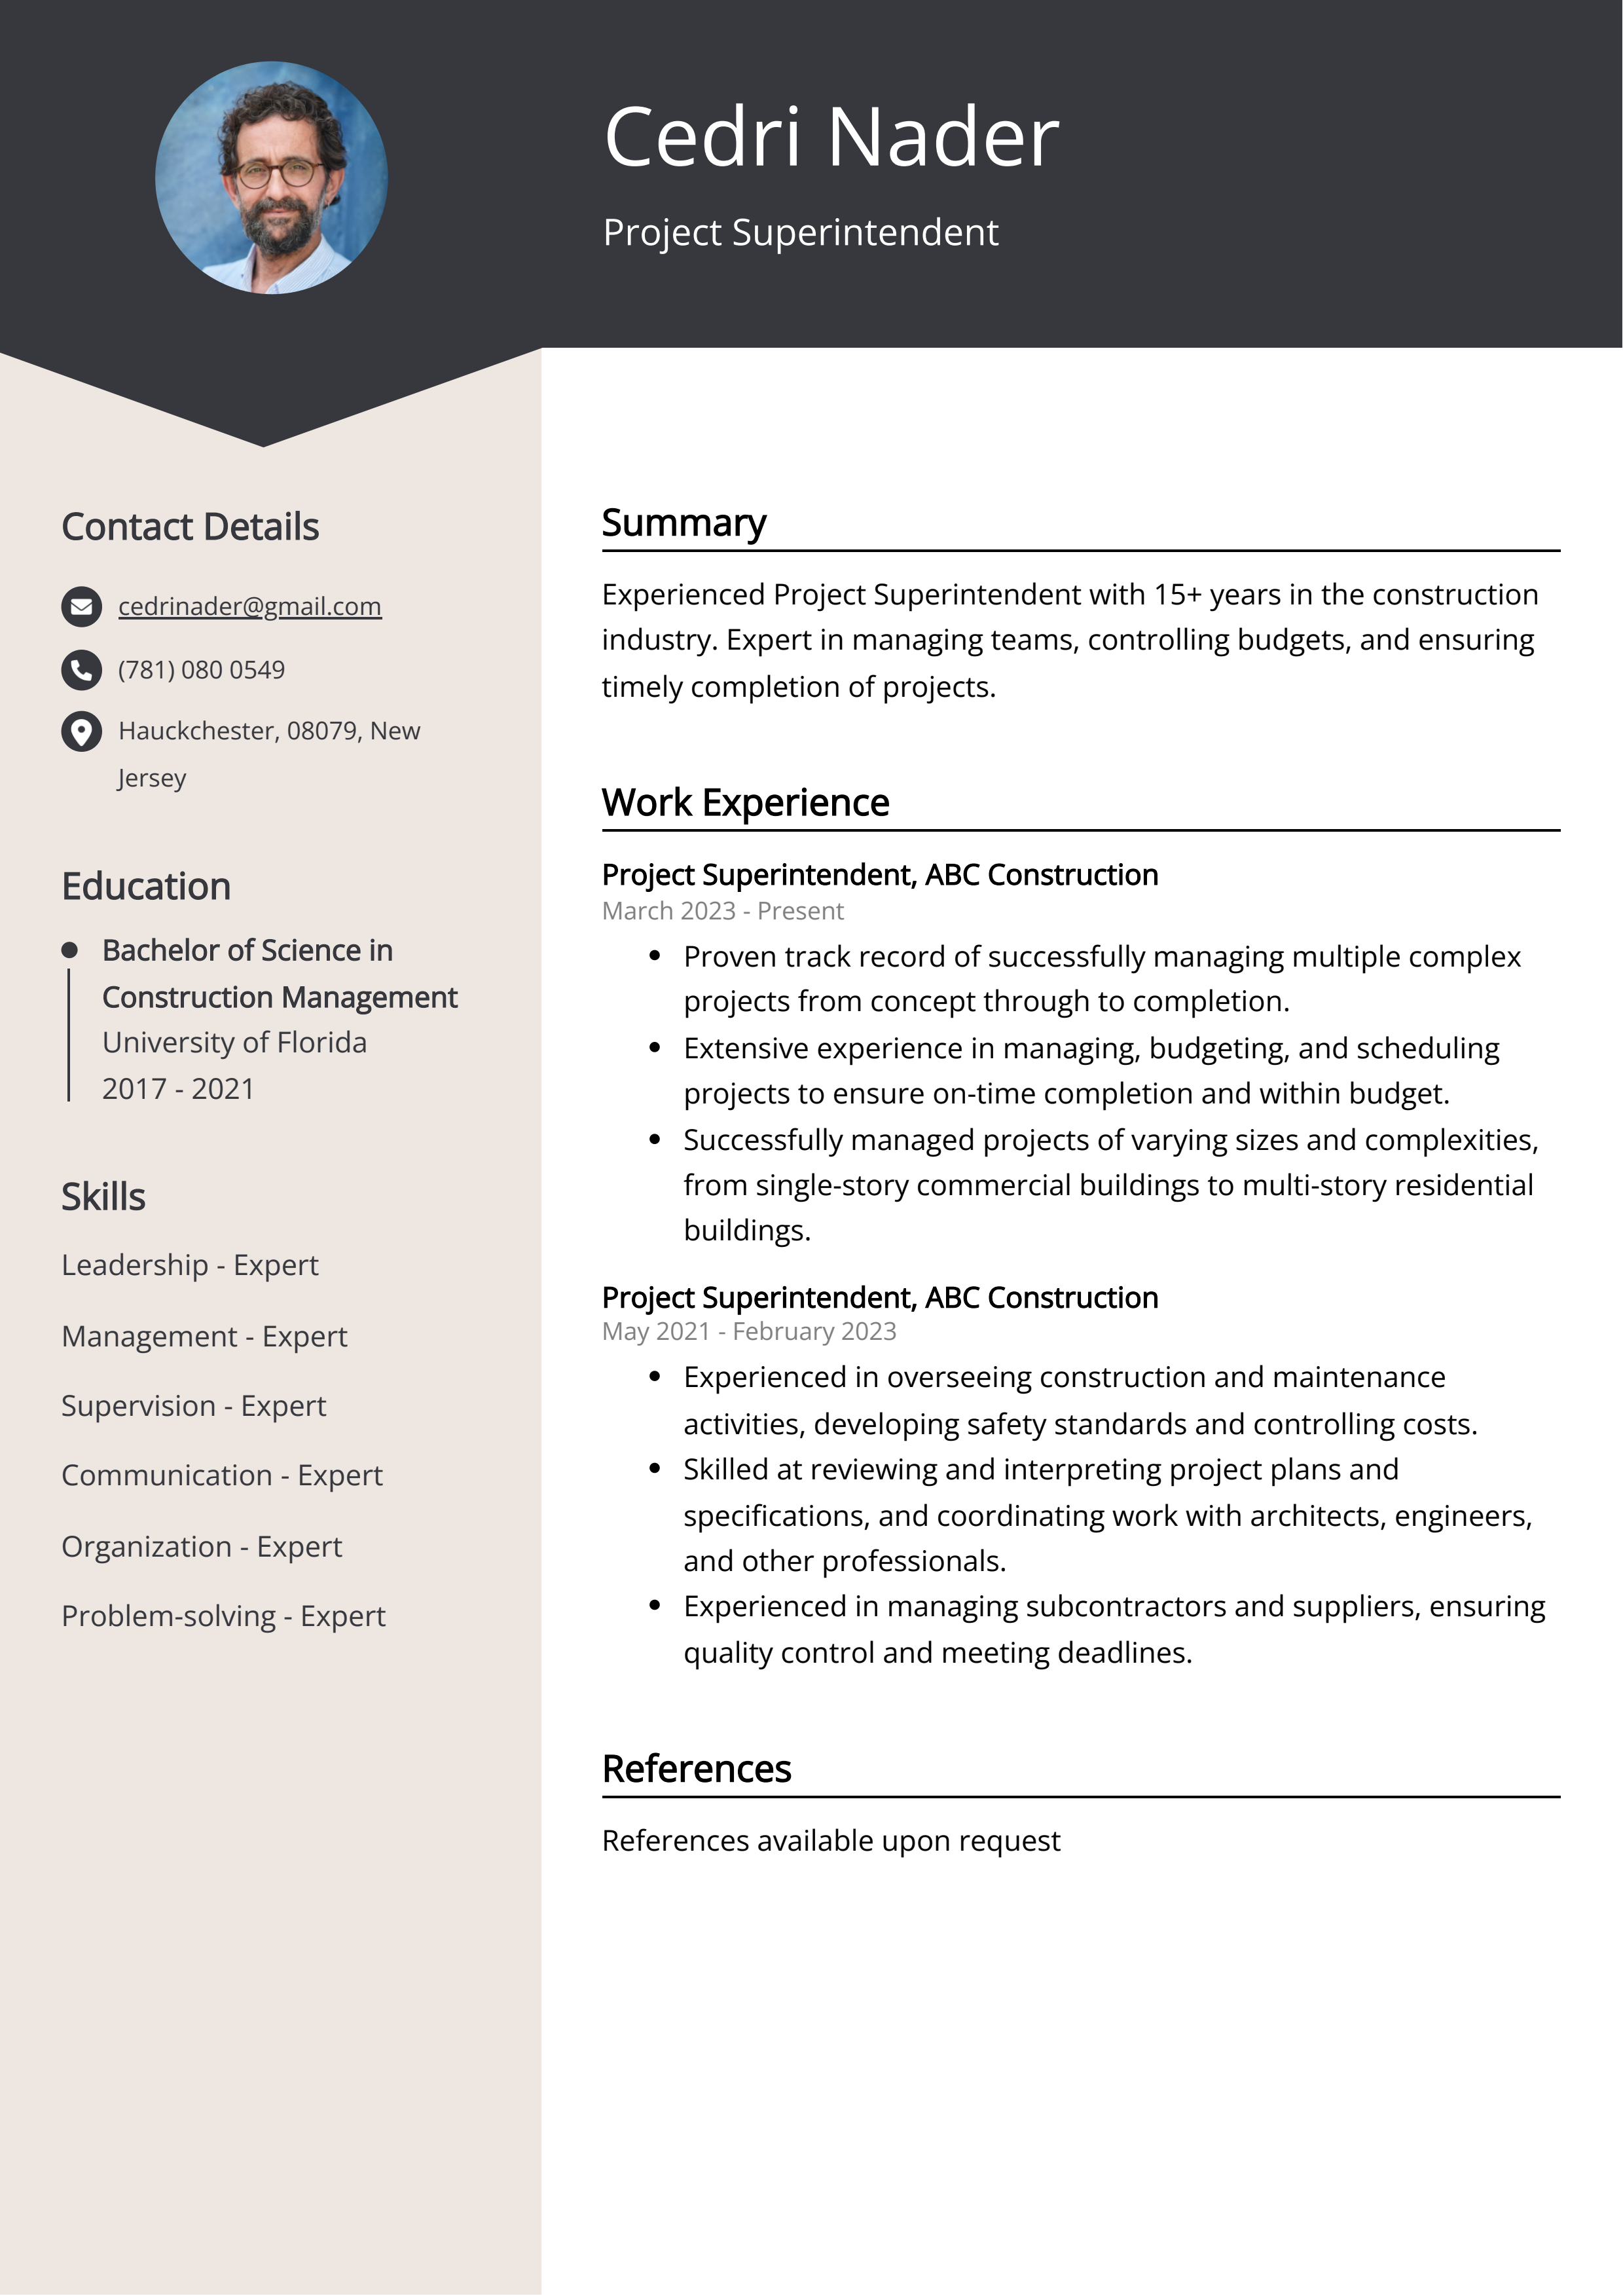 Project Superintendent CV Example